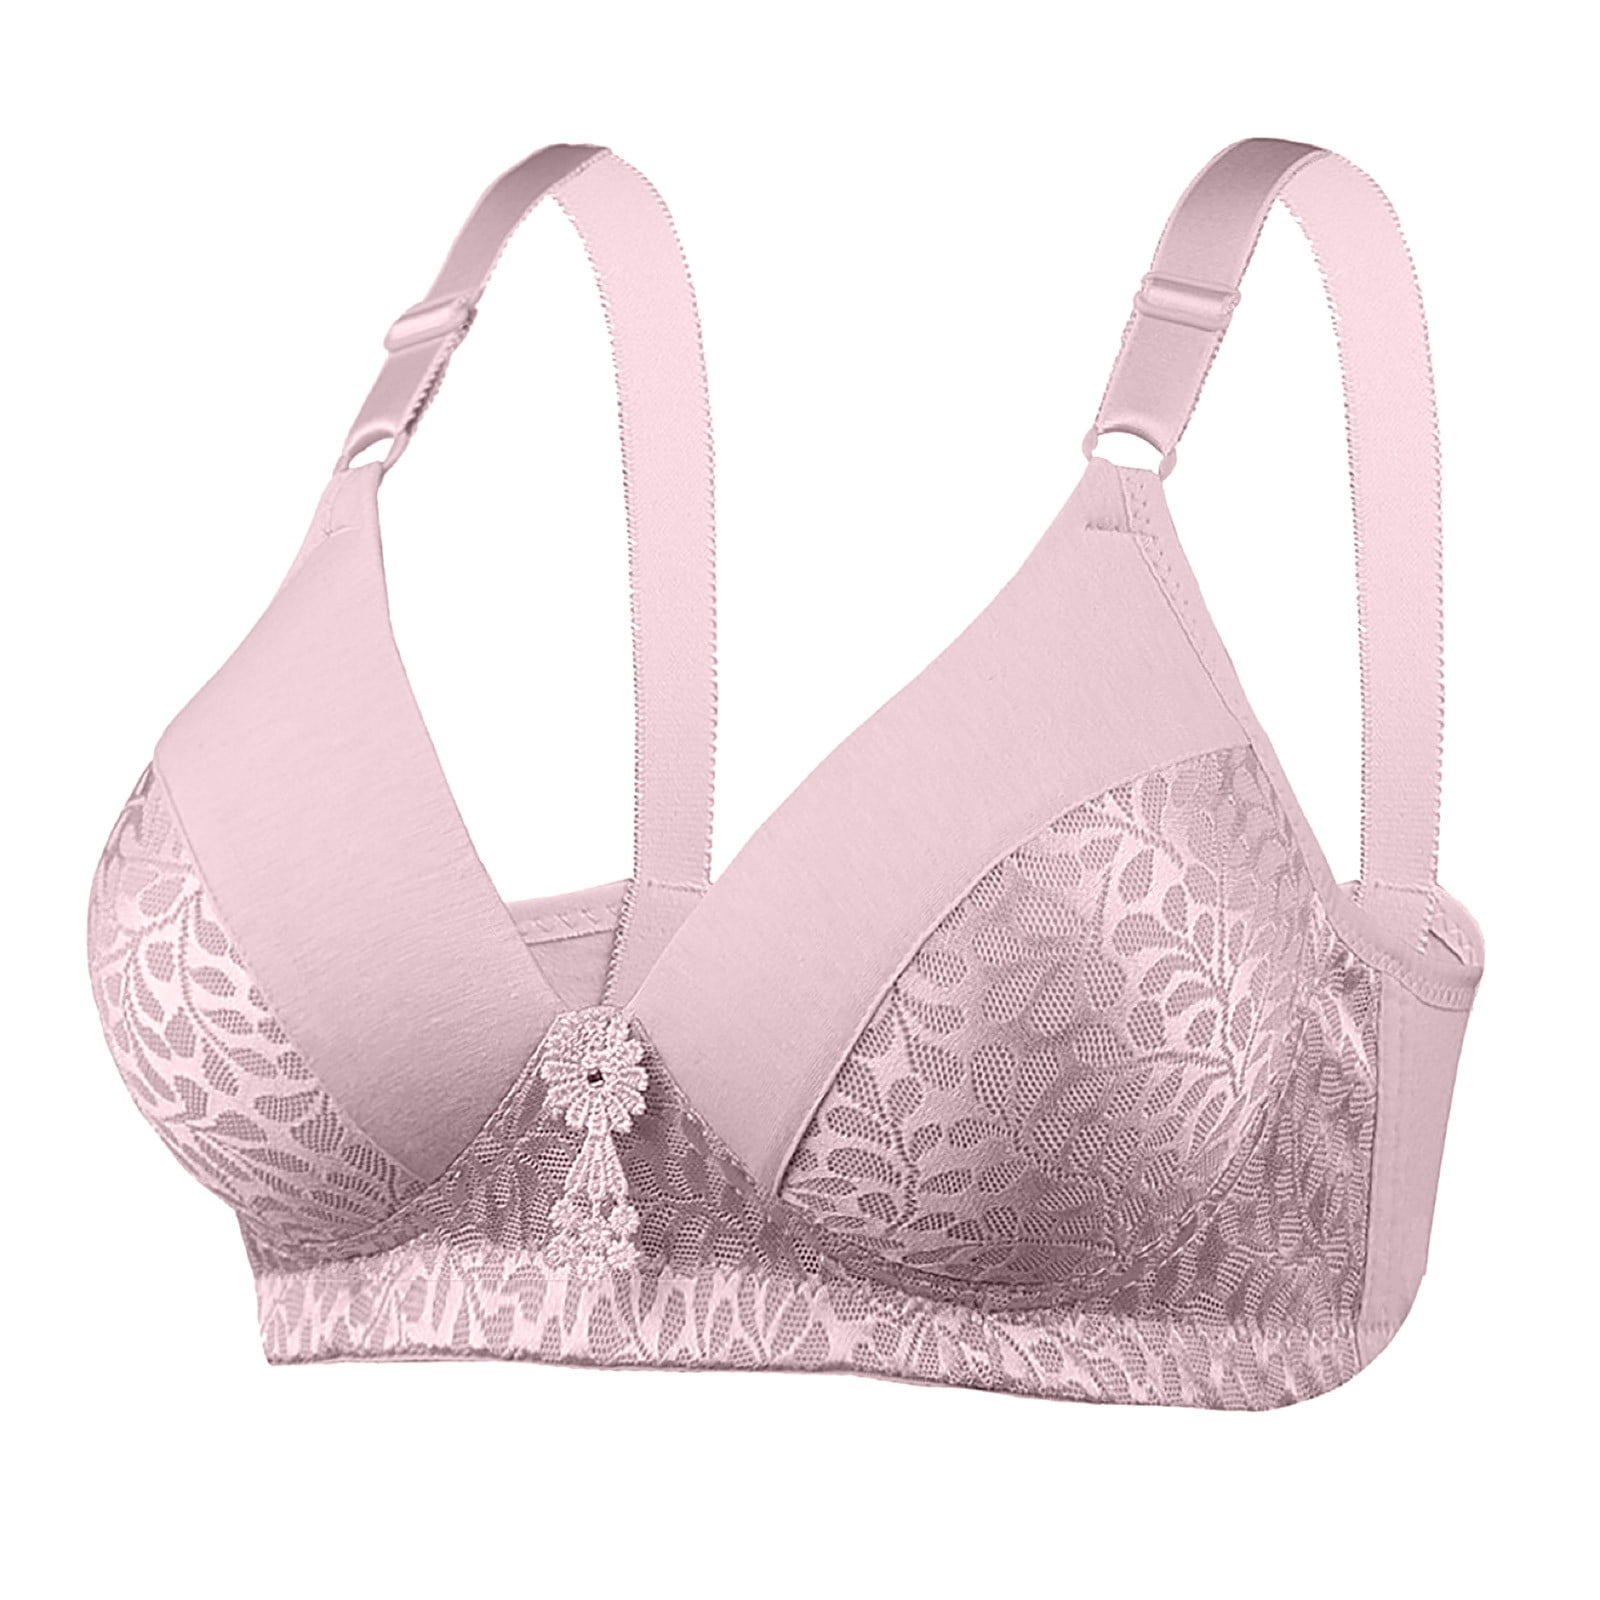 Ahh by Rhonda Shear Women's PinUp Girl Lace Leisure Bra with Removable 